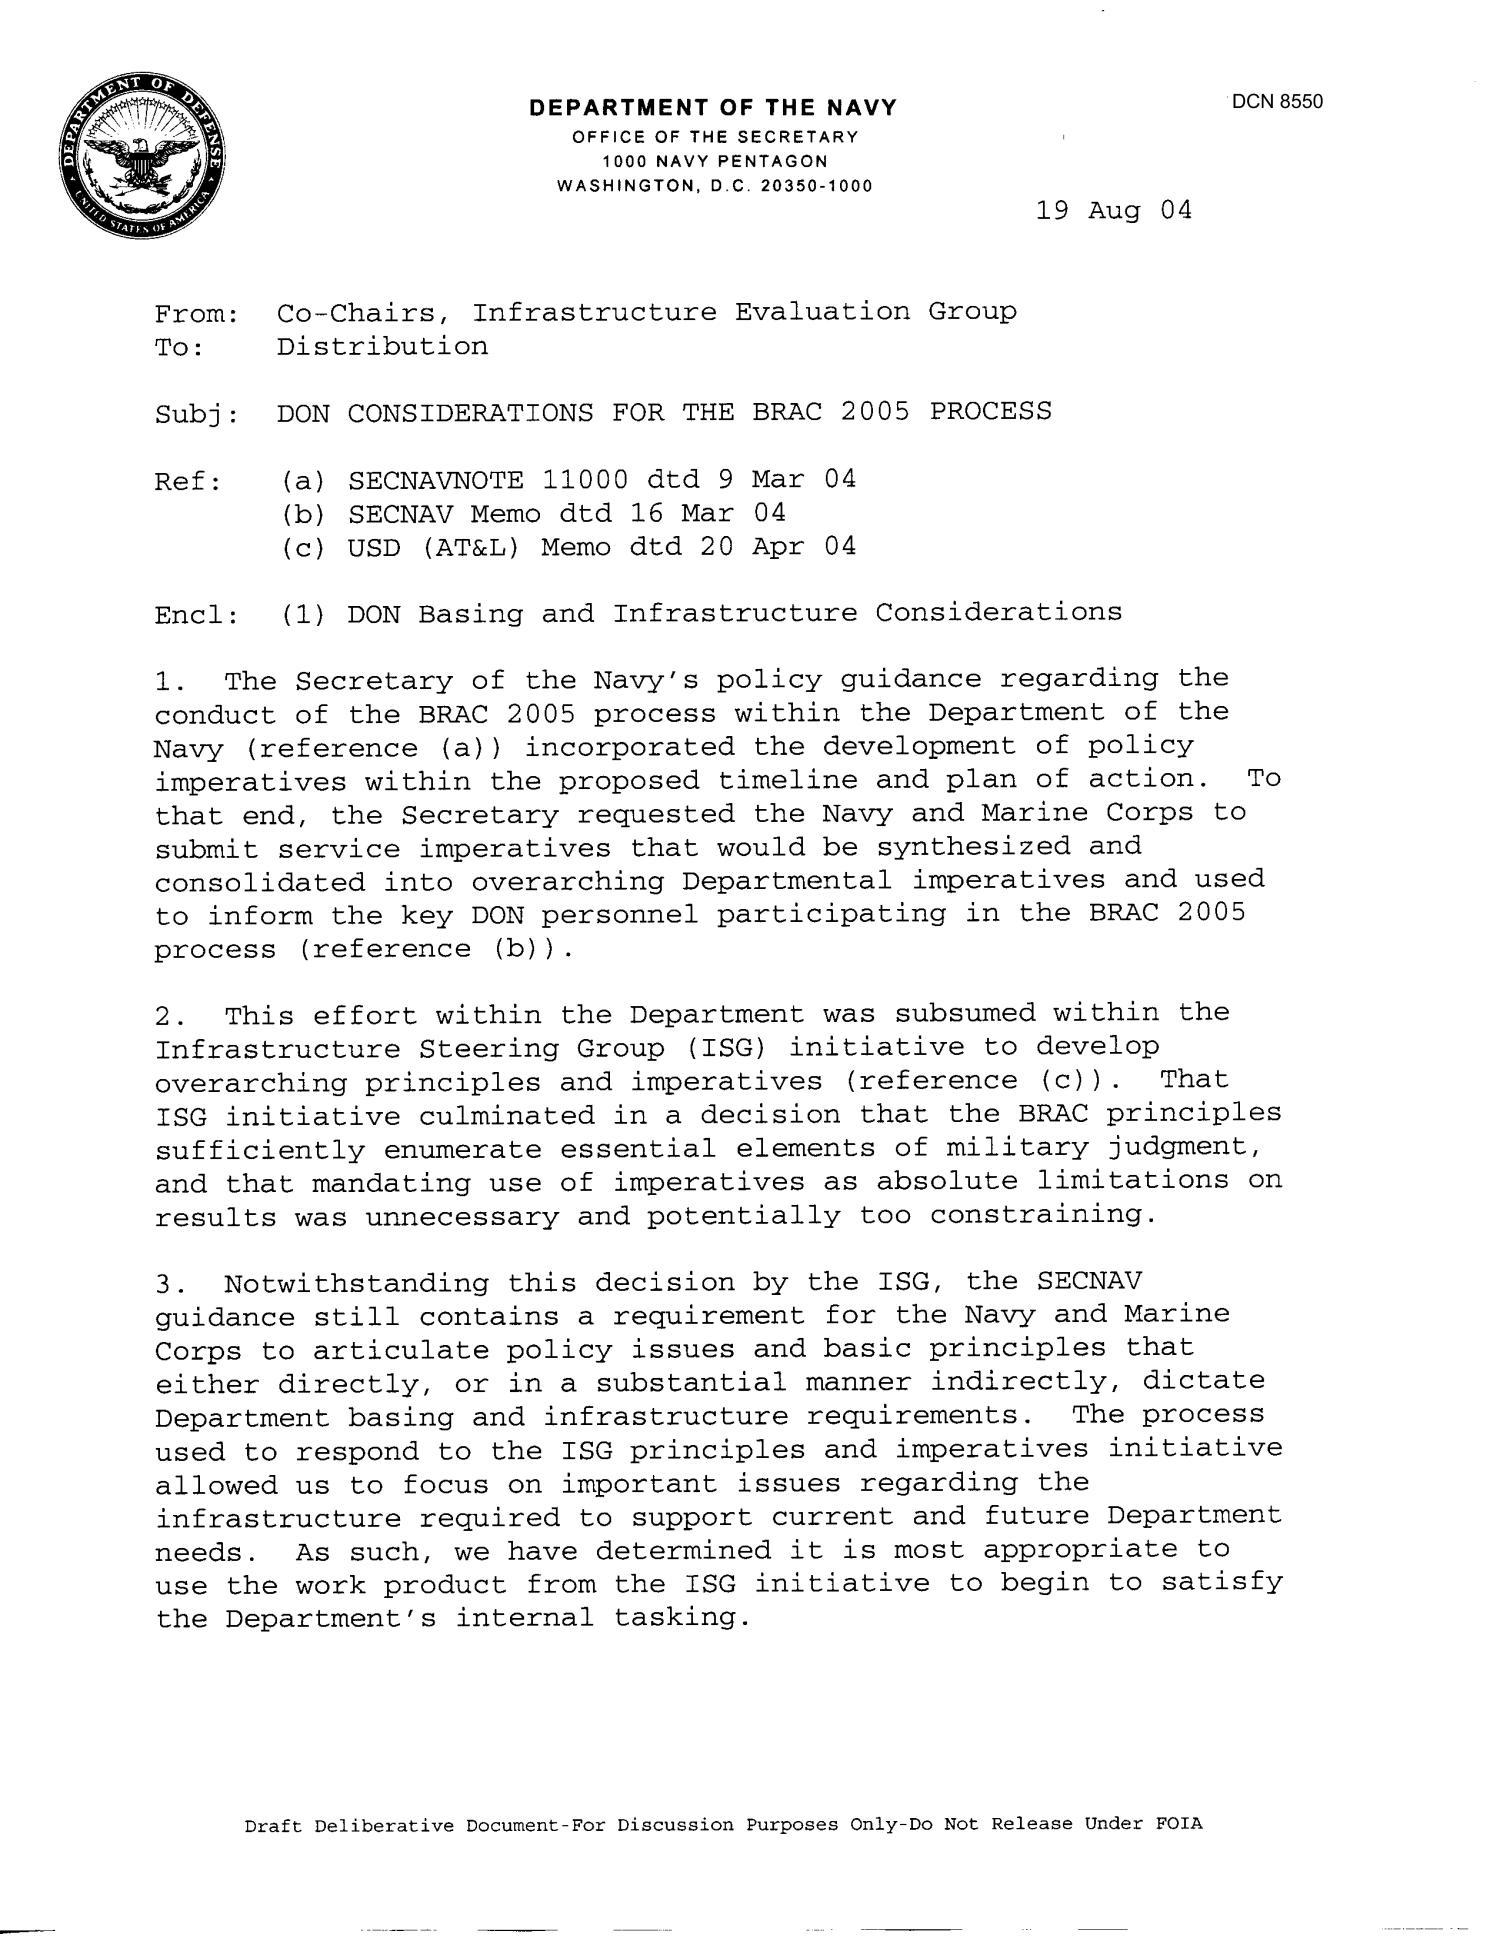 Department of the Navy Memorandum - Dept of Navy Considerations for the